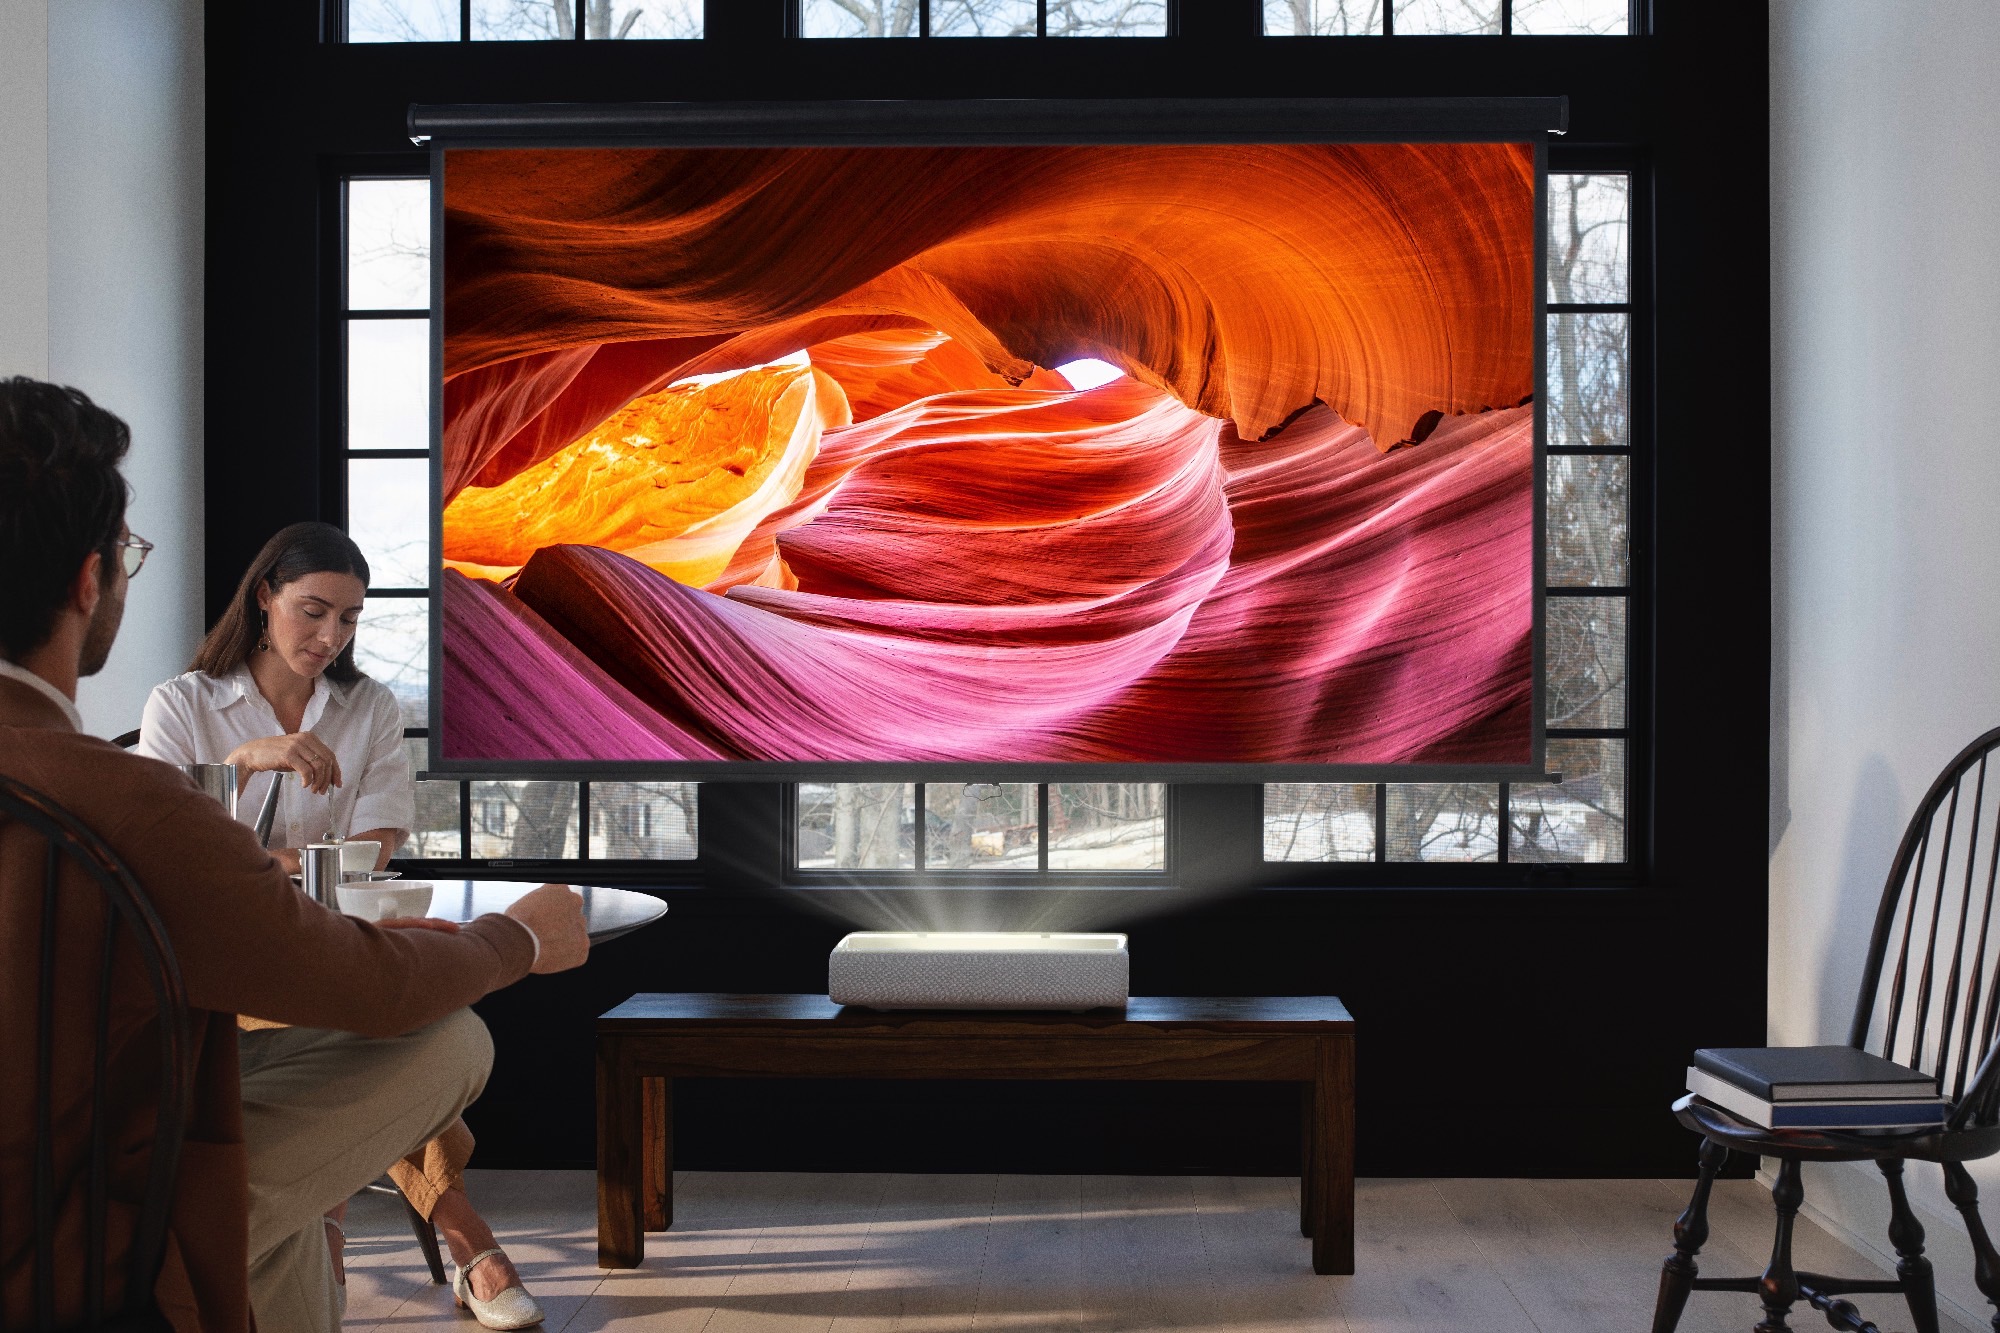 Samsung's 120-inch smart 4K projector is $1,500 off